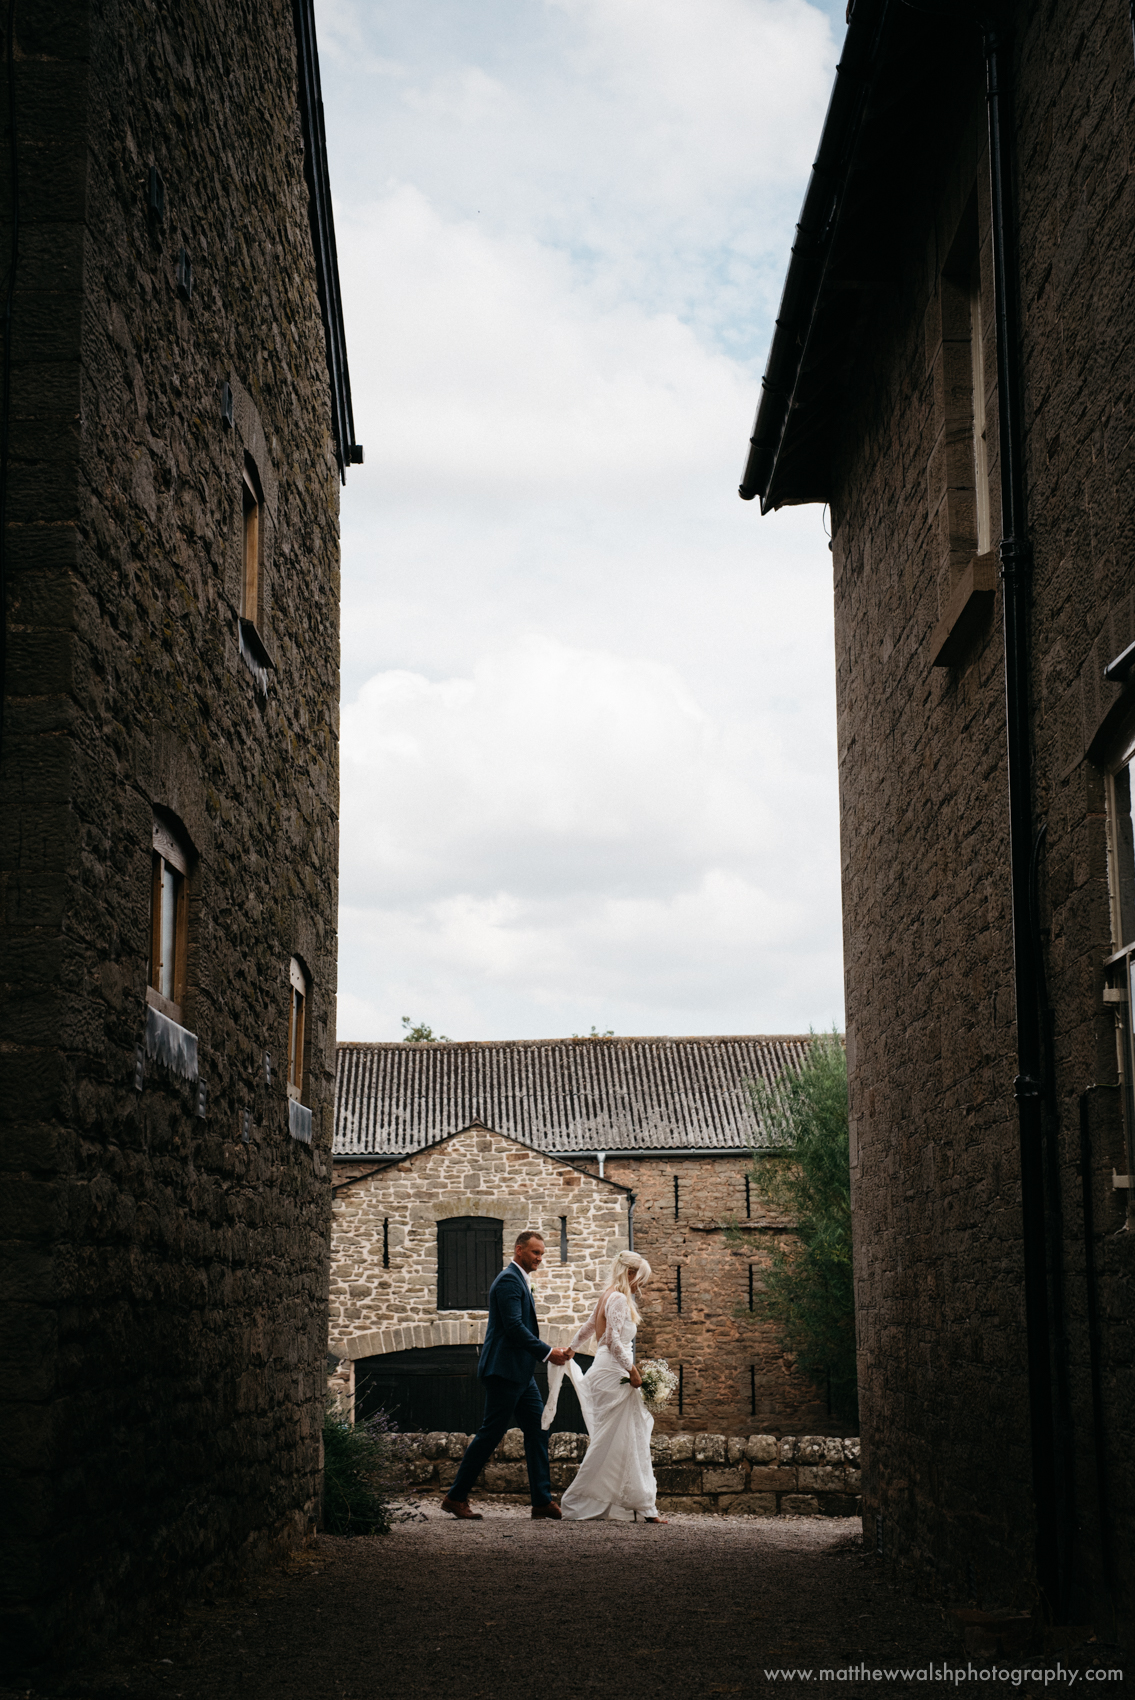 The bride and groom walking in the light, using the buildings and shadows to frame them